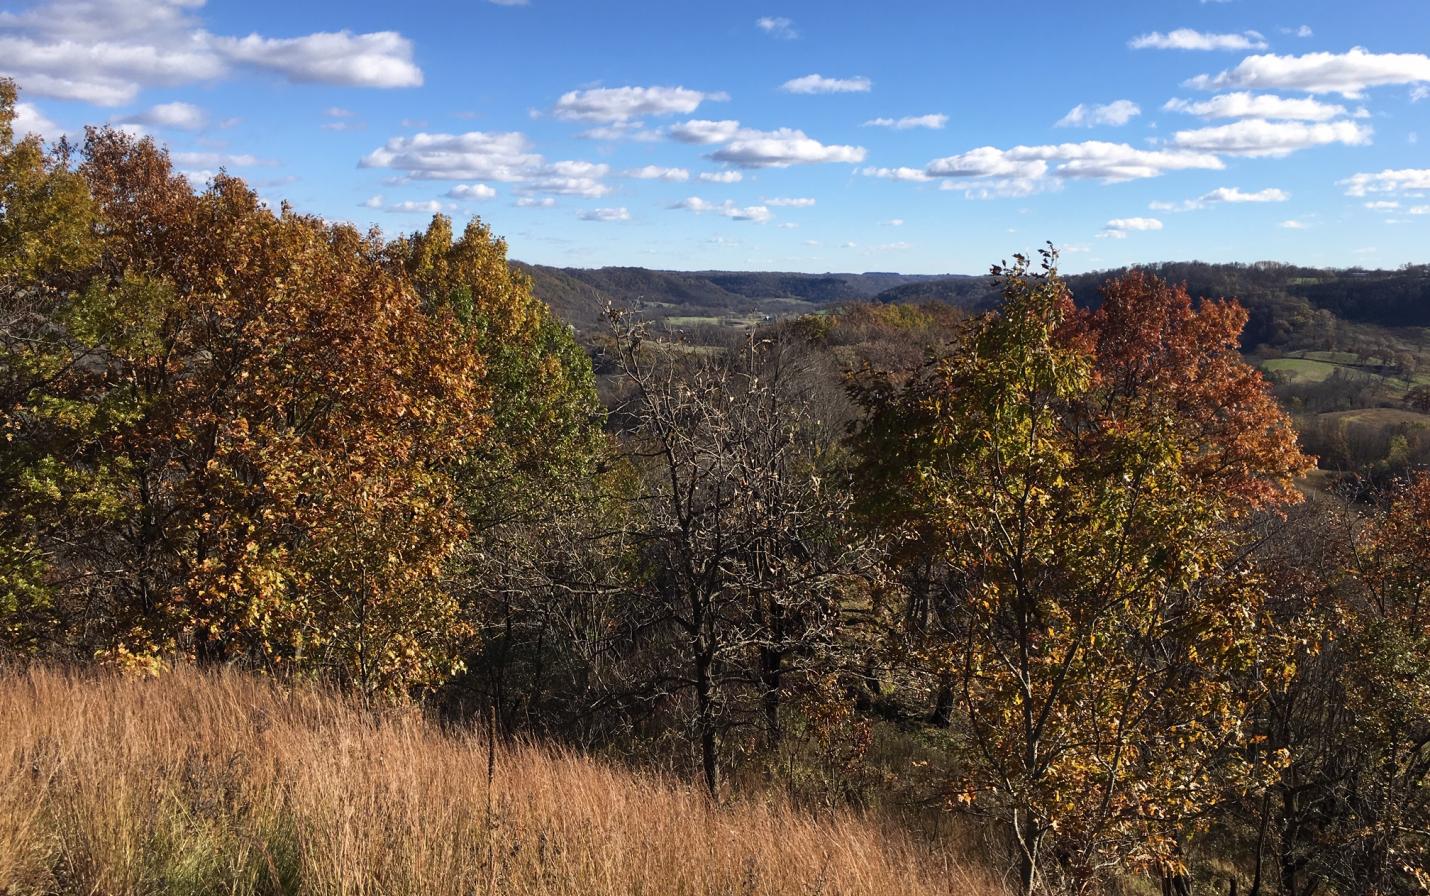 view from a ridge at Tunnelville Cliffs nature preserve – a state natural area